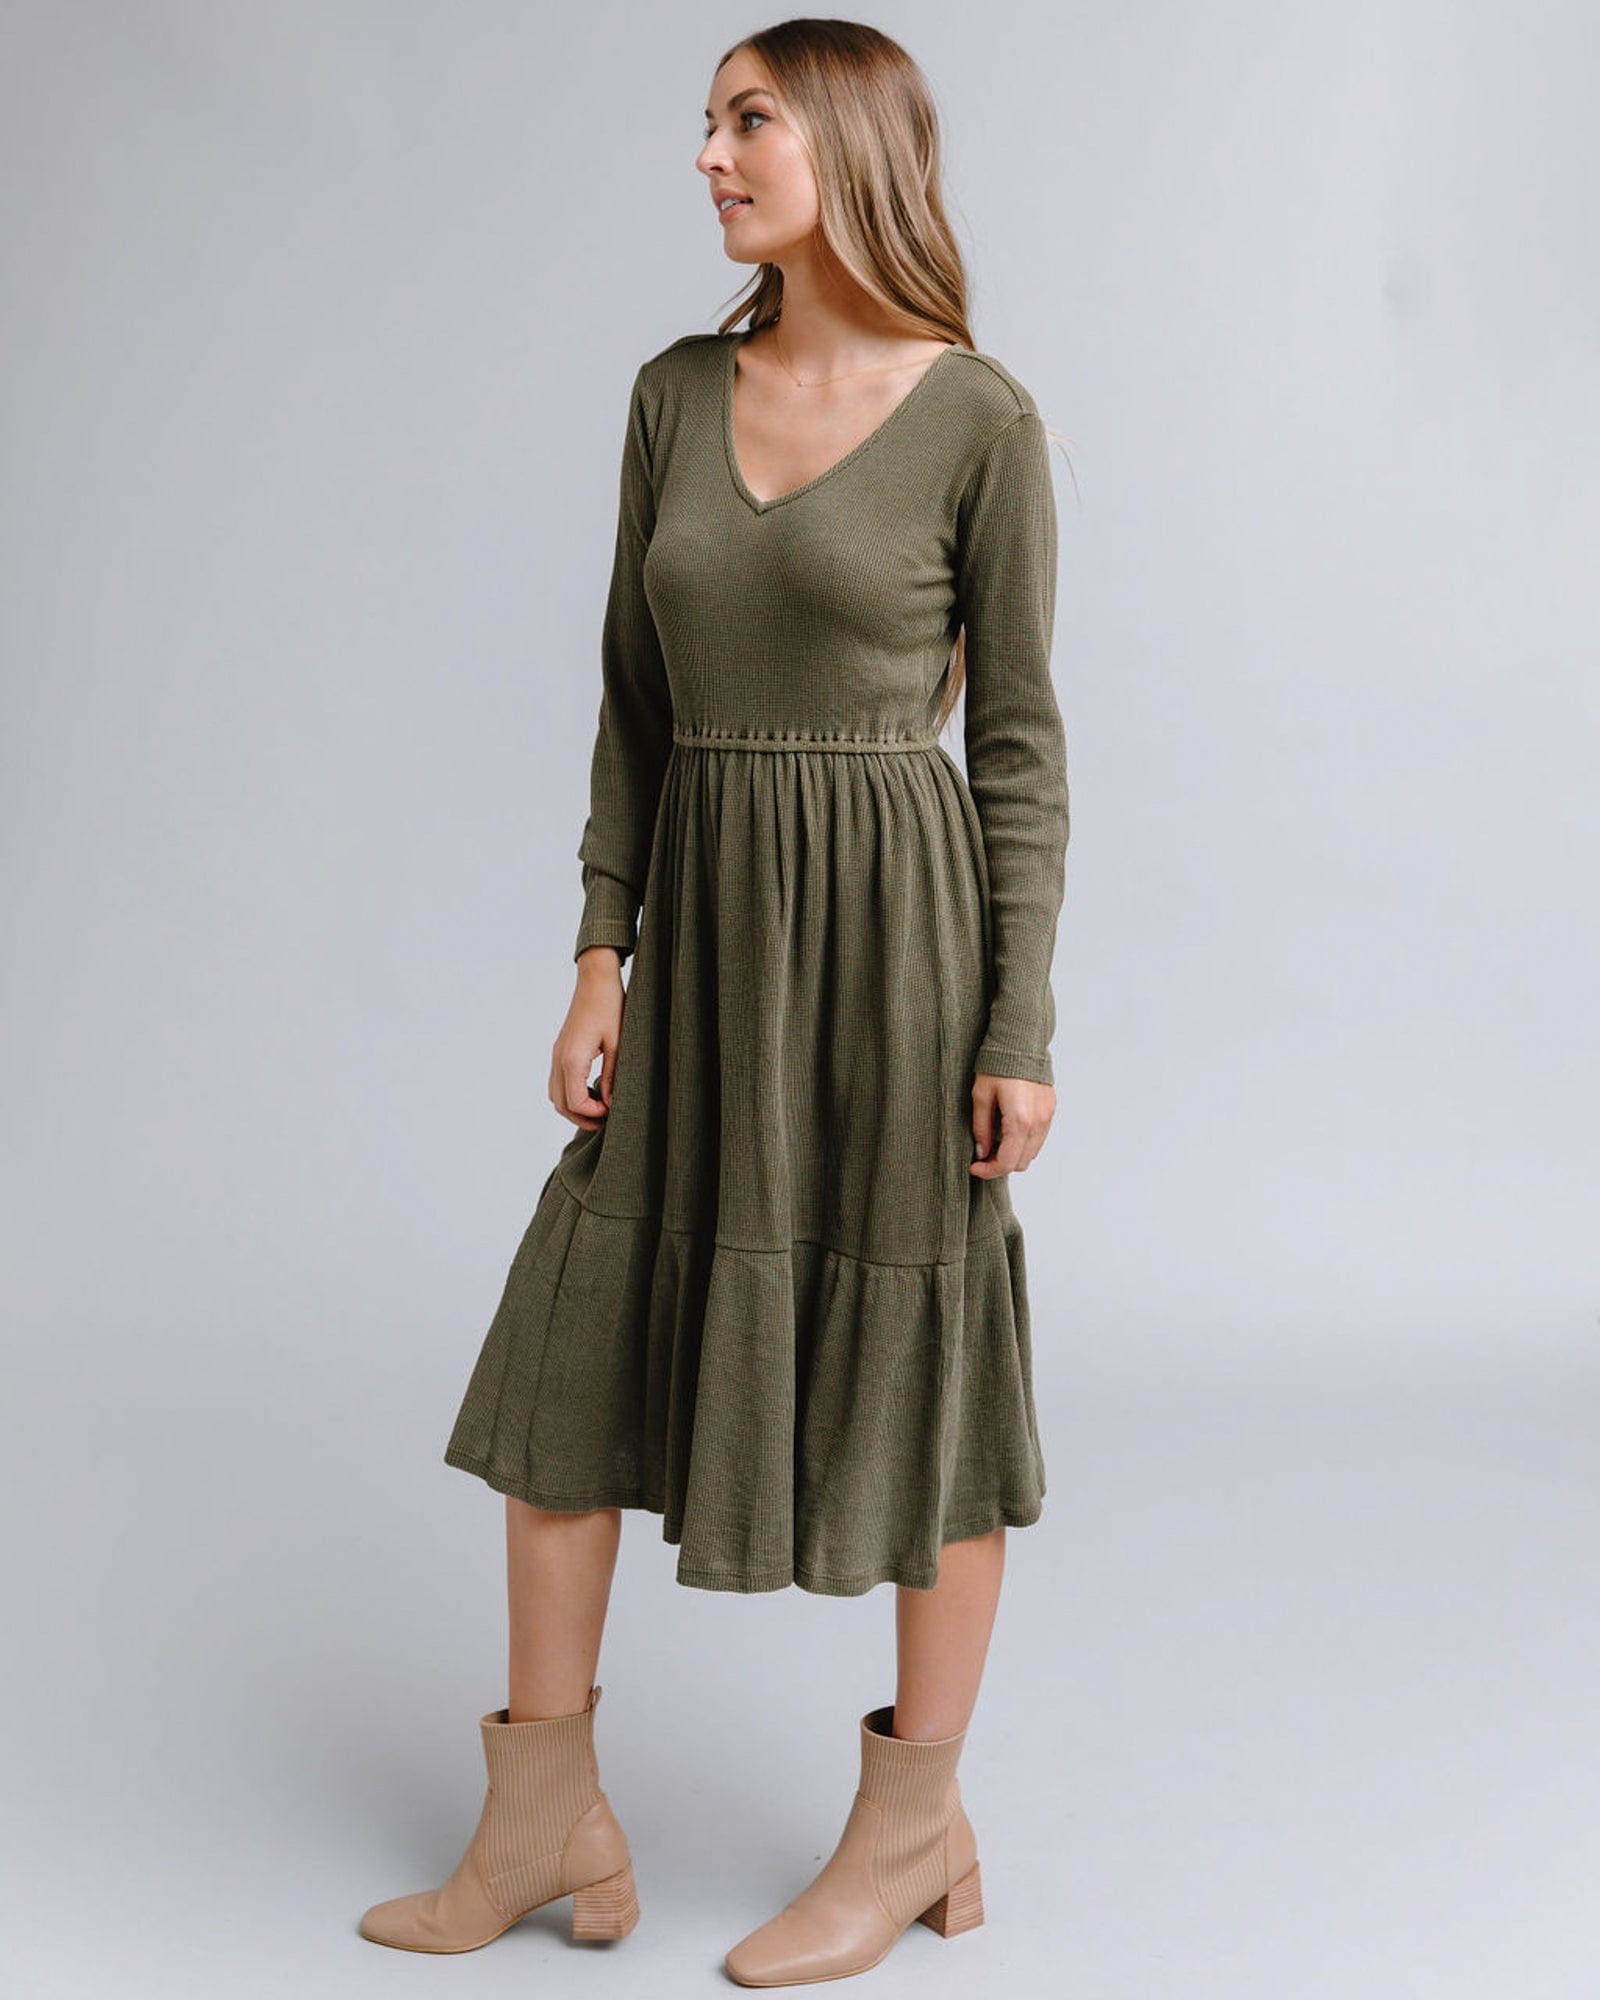 Woman in a long sleeve, v-neck, midi-length, olive green dress